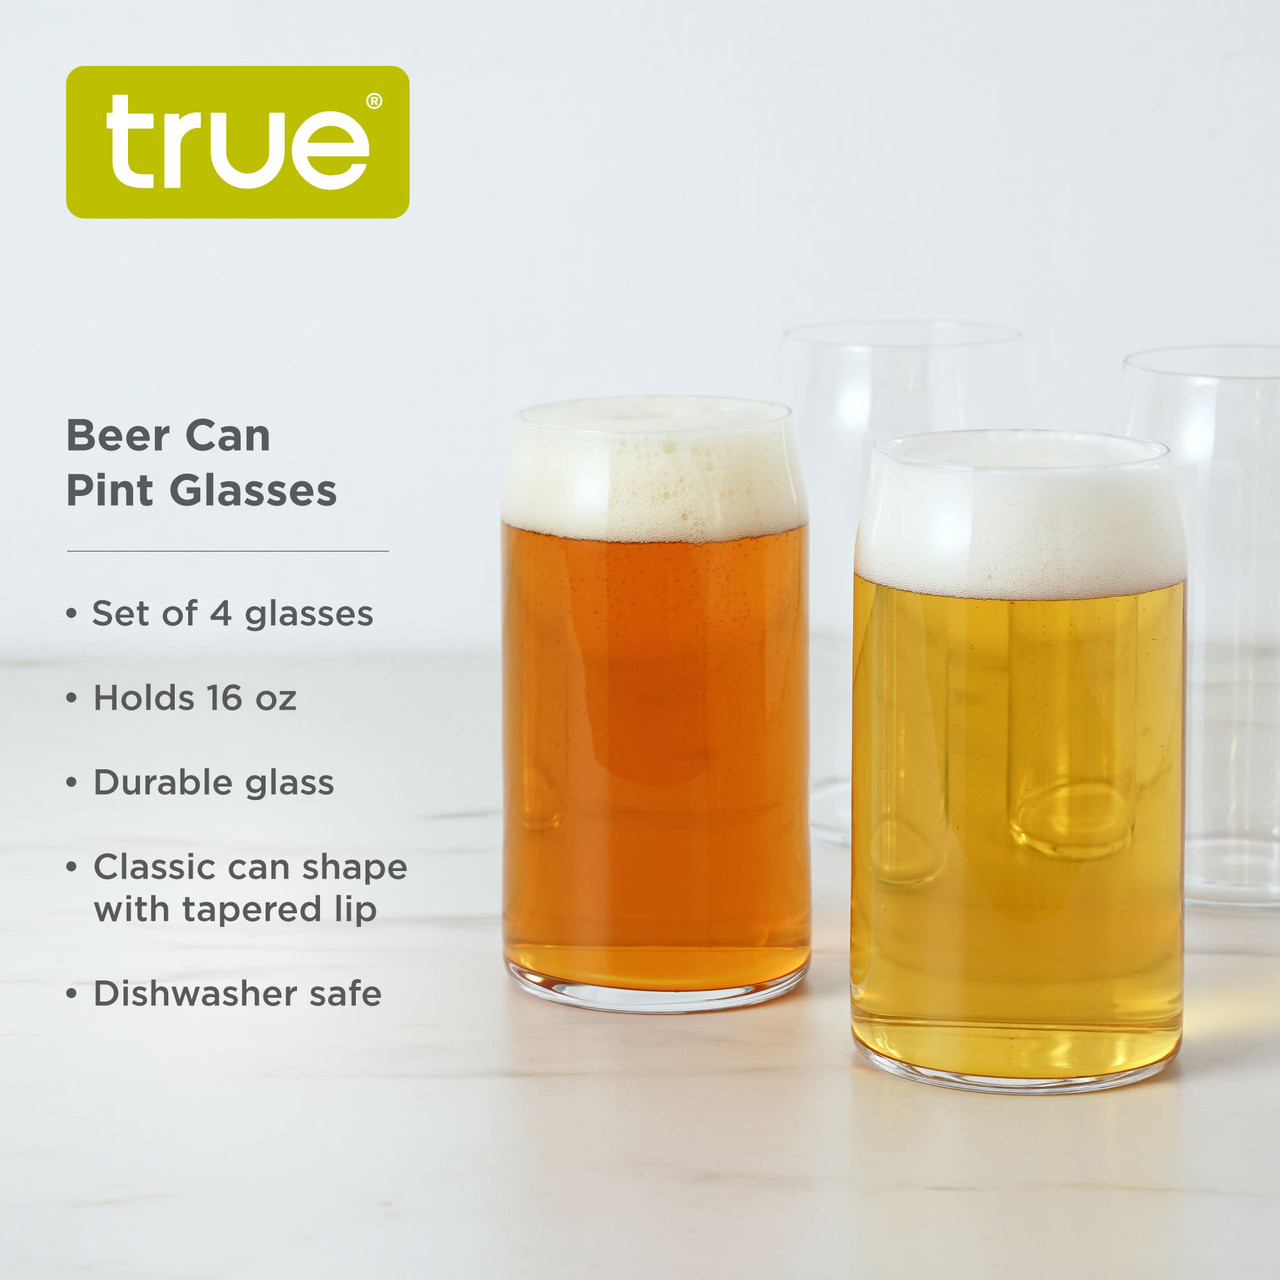 https://cdn11.bigcommerce.com/s-oo0gdojvjo/images/stencil/1280x1280/products/68504/101589/beer-can-pint-glasses-by-true-set-of-4-3__44536.1683797259.jpg?c=2&imbypass=on